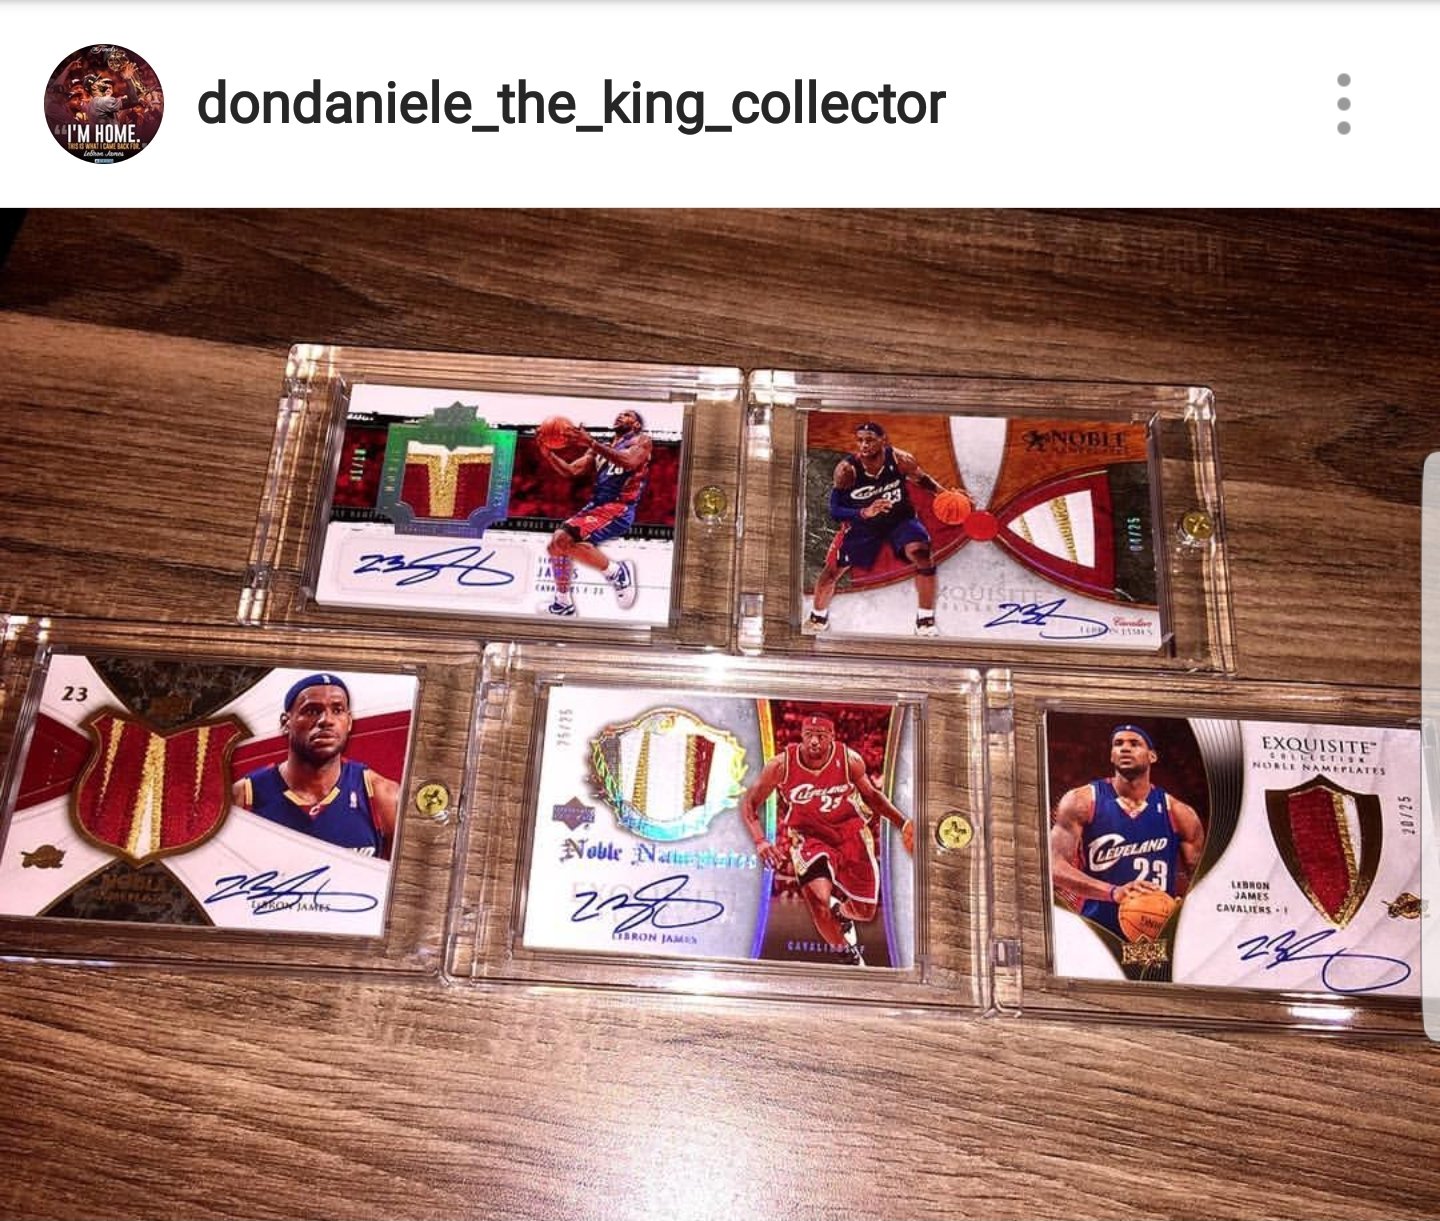 Don Daniele the King Collector Instagram